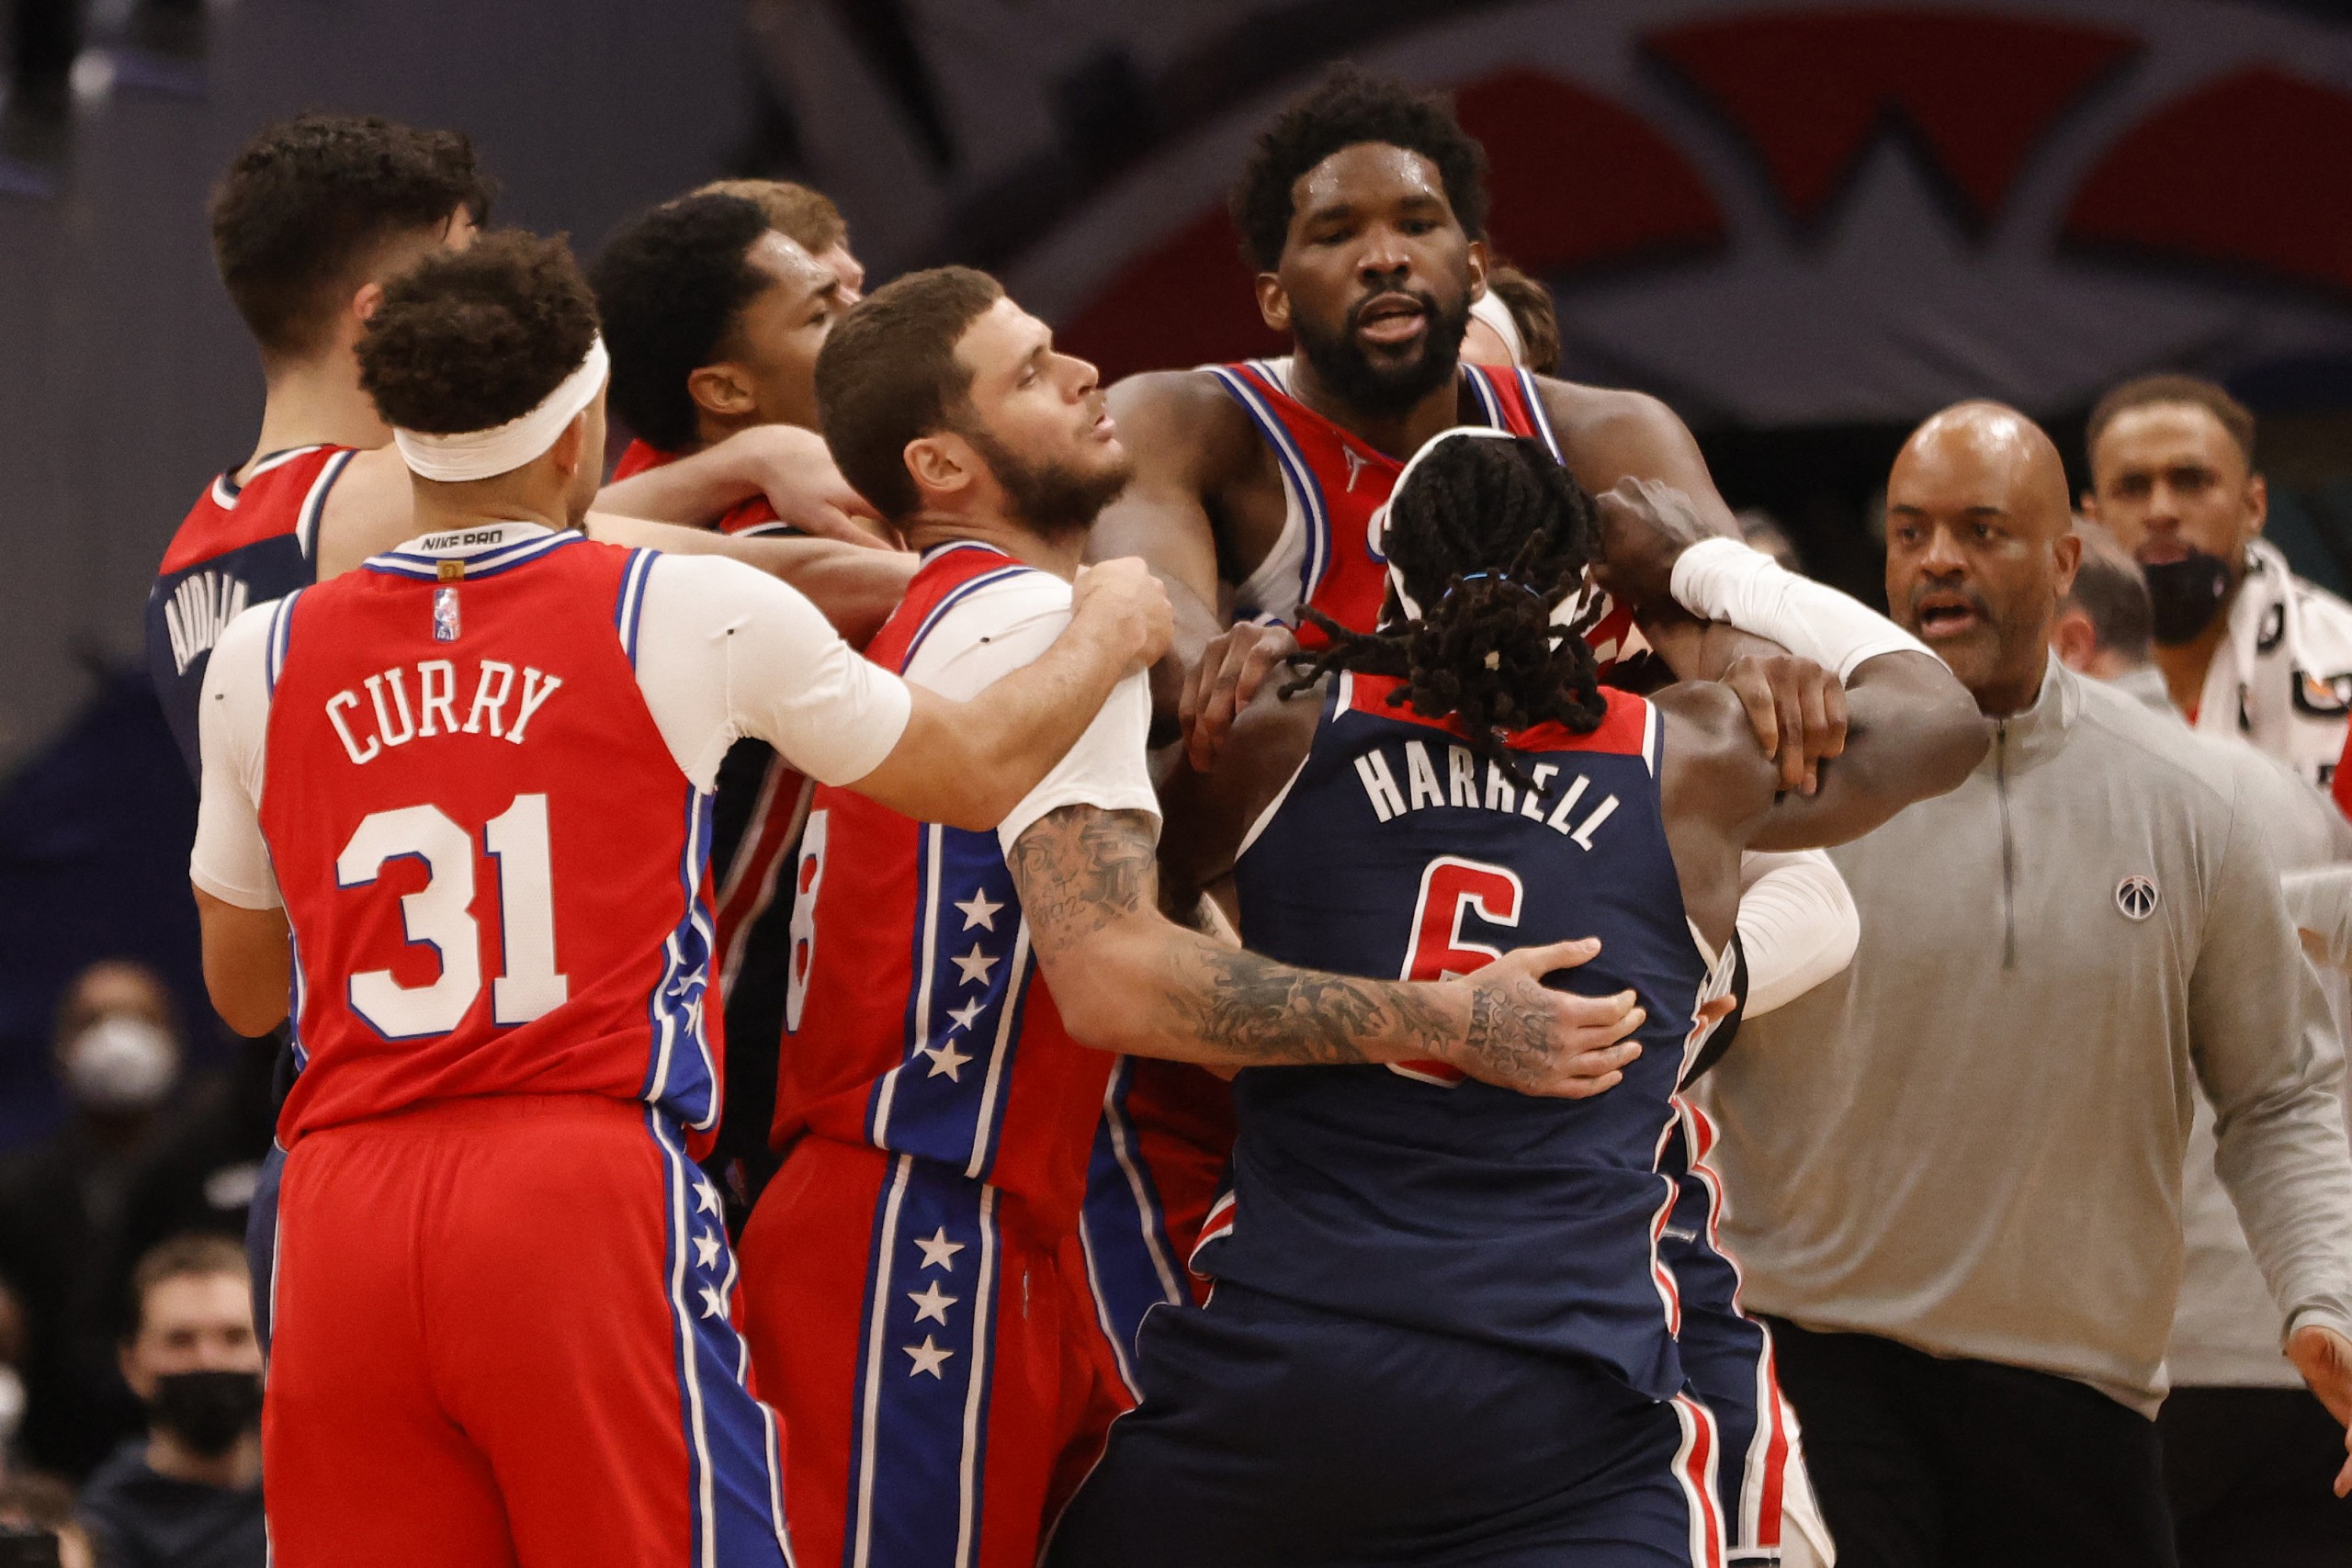 Dec 26, 2021; Washington, District of Columbia, USA; Philadelphia 76ers center Joel Embiid (21) and Washington Wizards center Montrezl Harrell (6) get into an altercation during the third quarter at Capital One Arena. Mandatory Credit: Geoff Burke-USA TODAY Sports